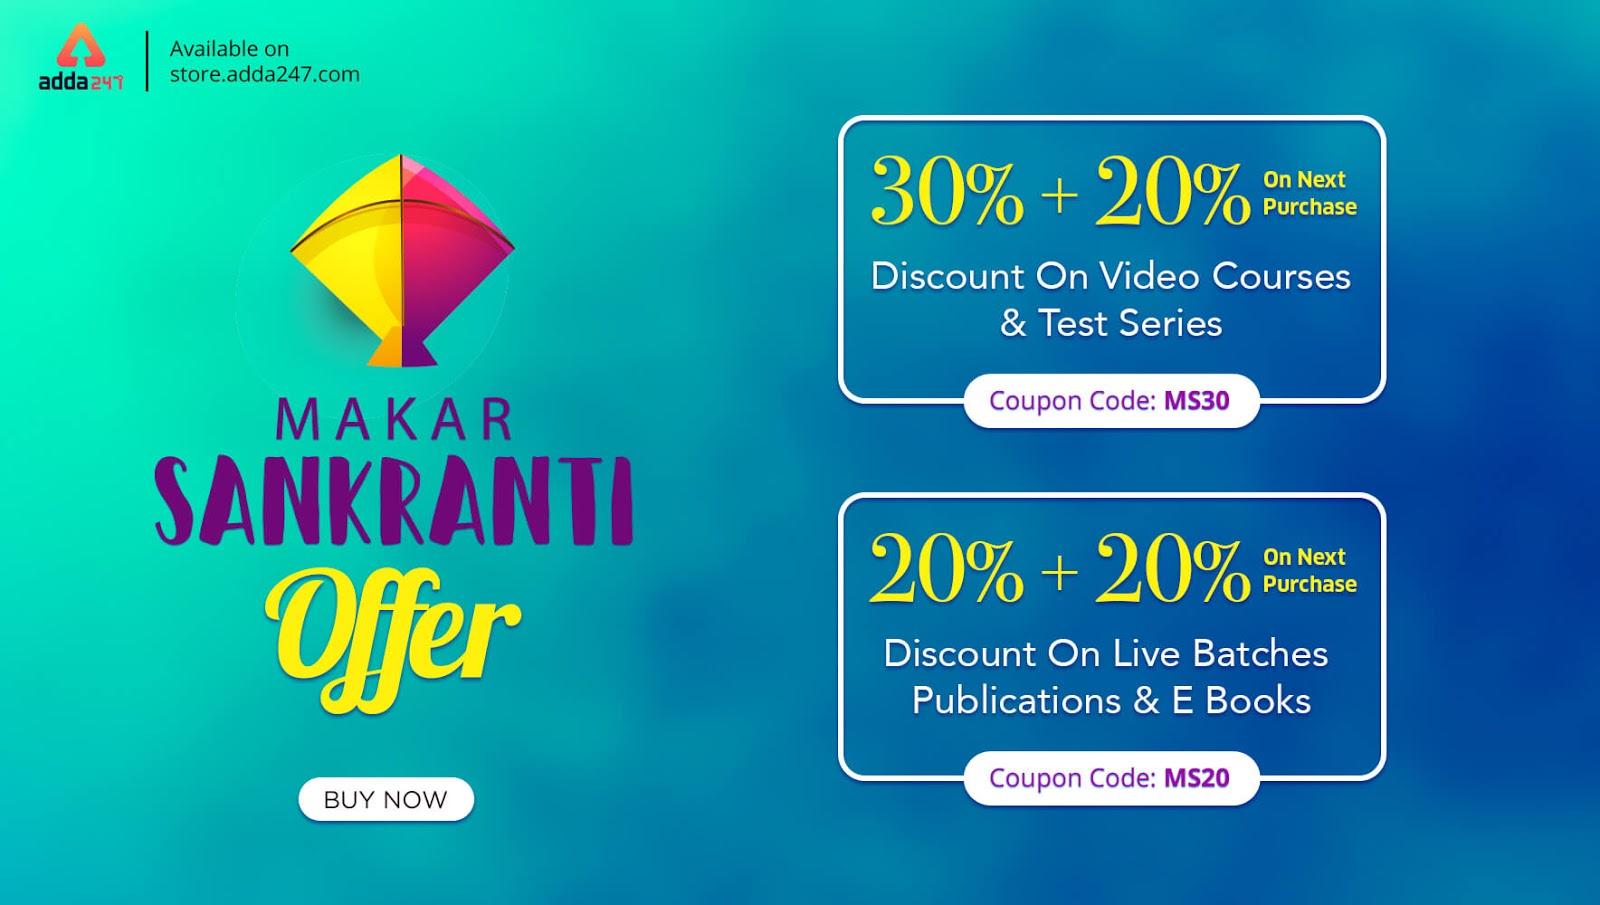 Only 2 Hours Left to Get Upto 30% Off On Test Series, Video Courses, Live Batches, Printed Books & eBooks |_2.1